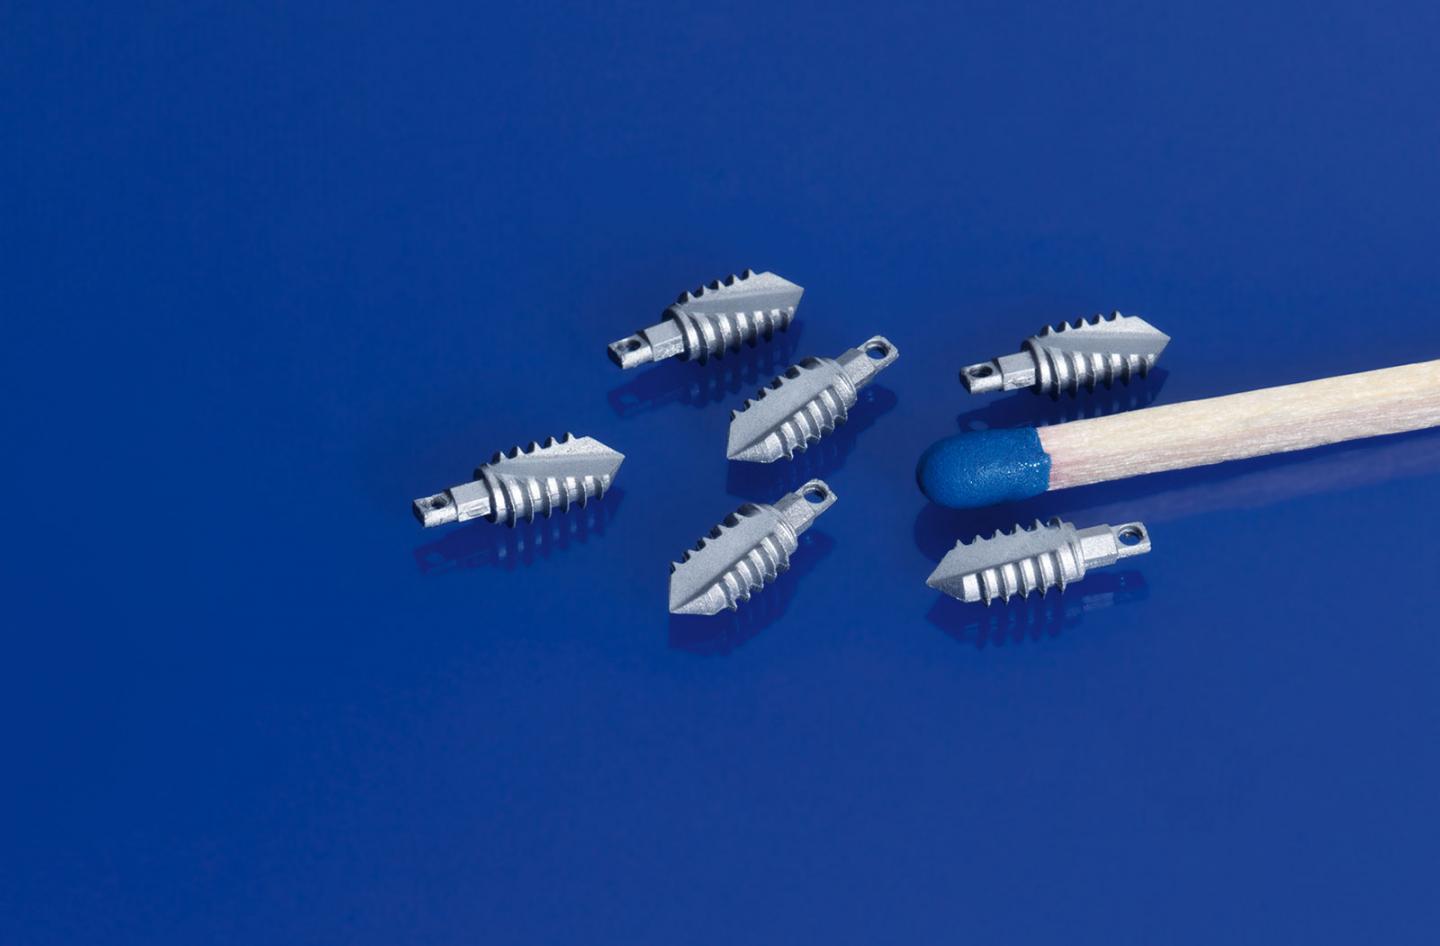 Fewer Surgeries with Degradable Implants